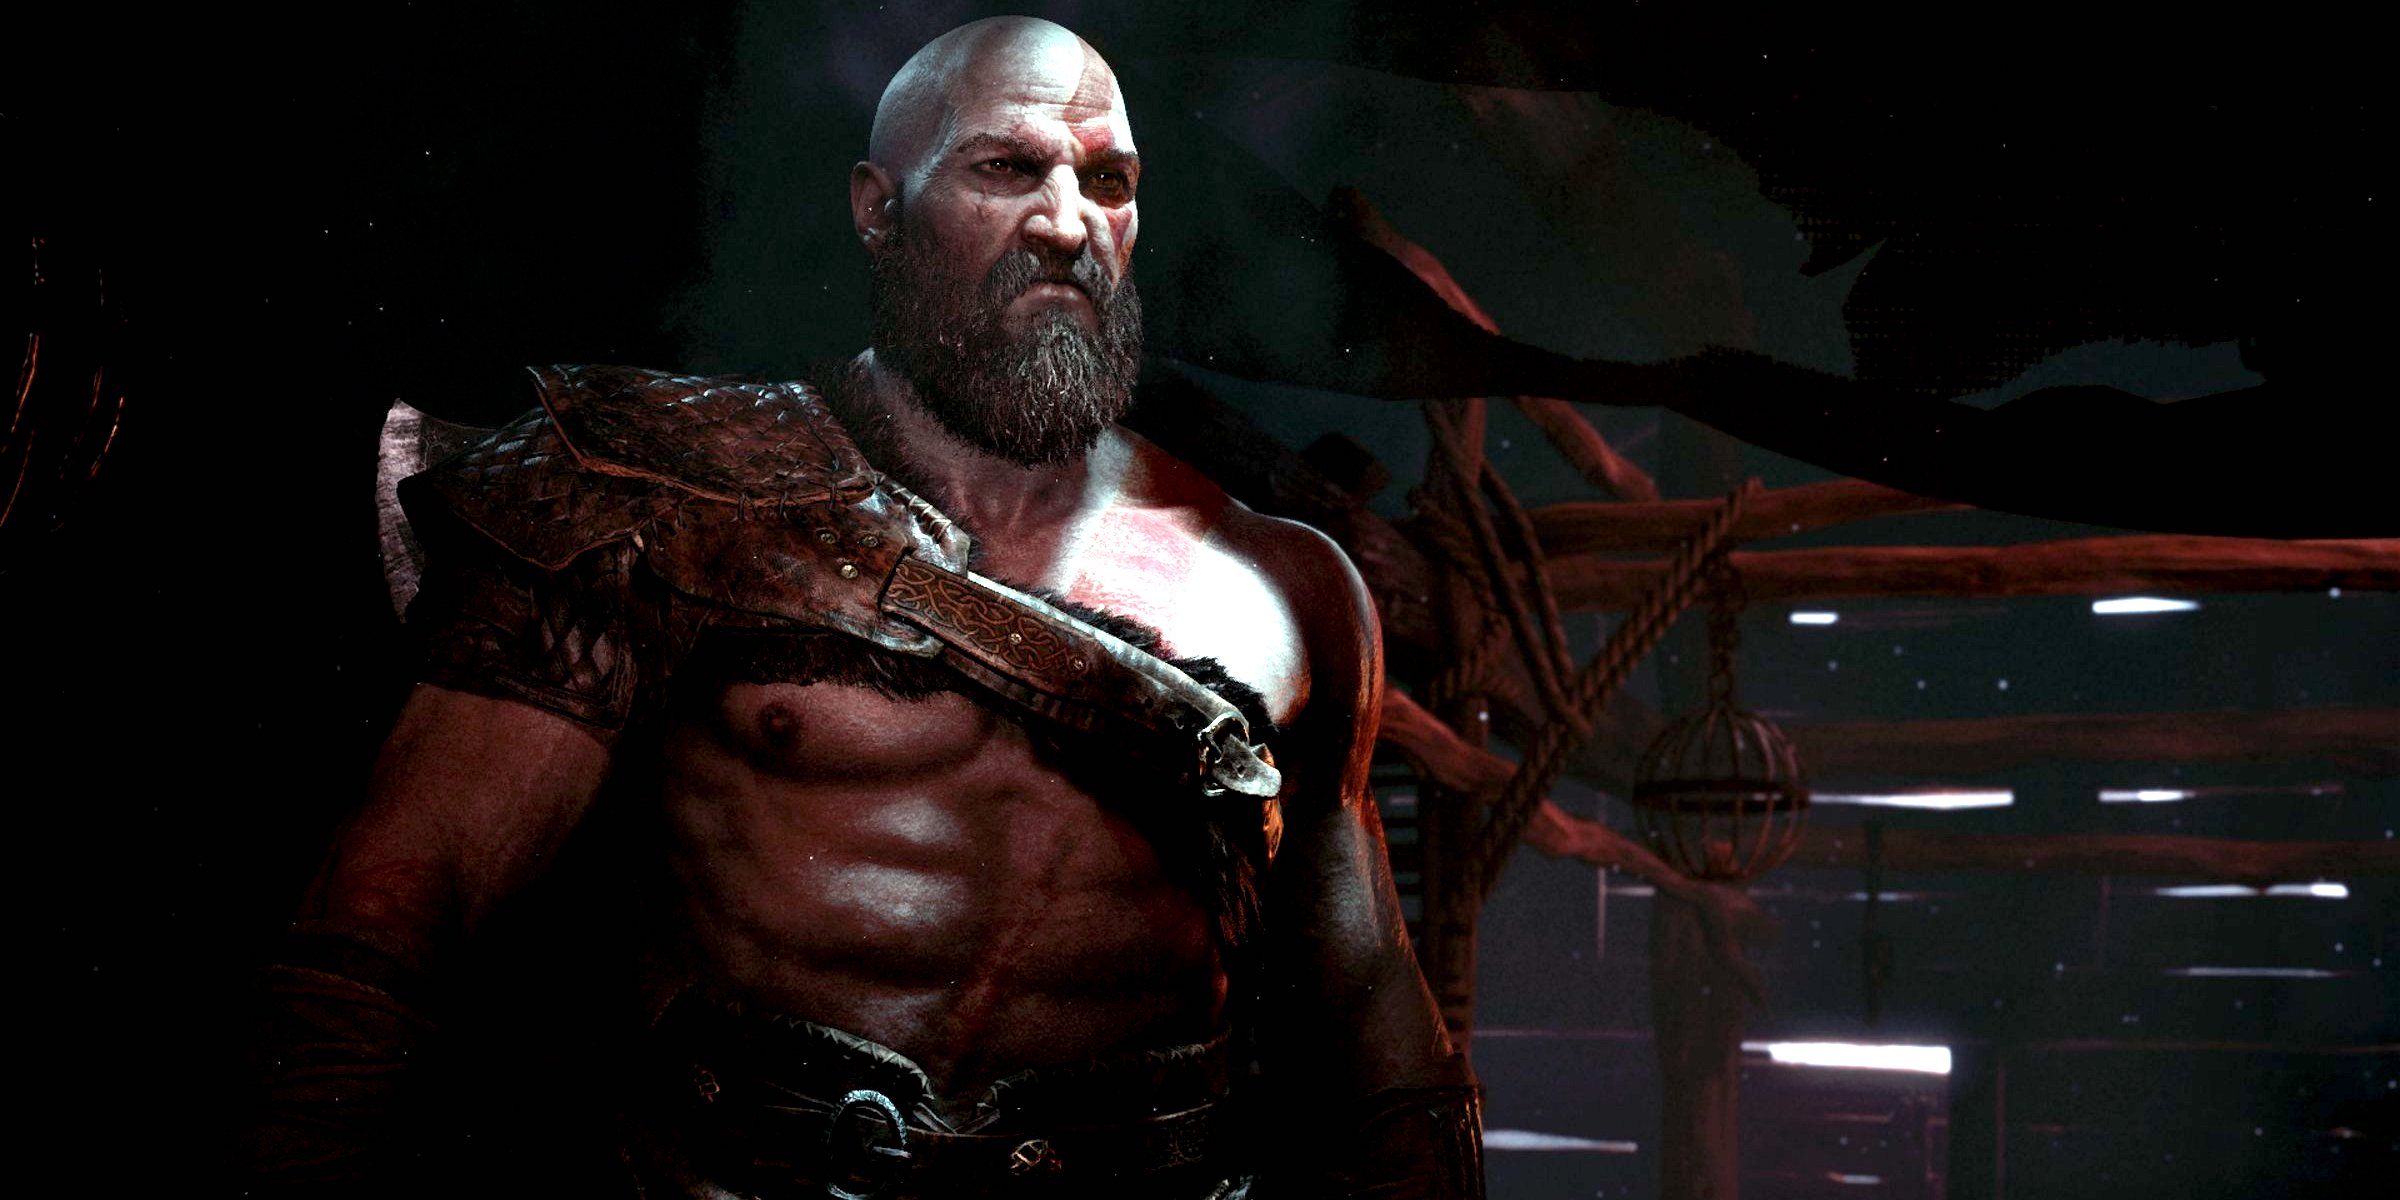 God of War' gets a 60 fps and 4K patch for PS5 tomorrow